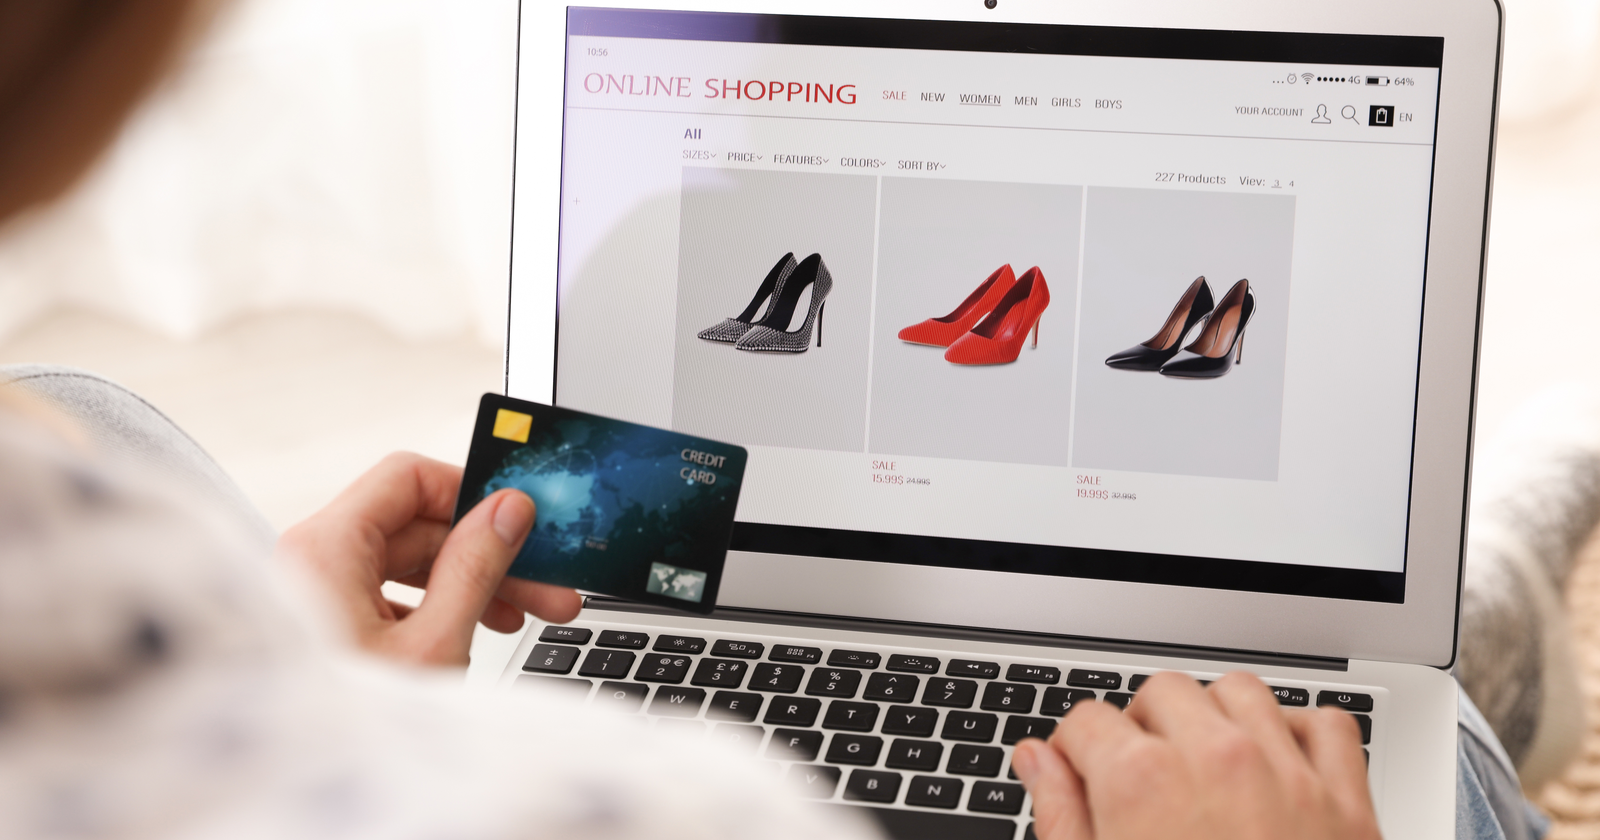 9 Things To Optimize On An Ecommerce Site To Drive Sales via @sejournal, @adamproehl